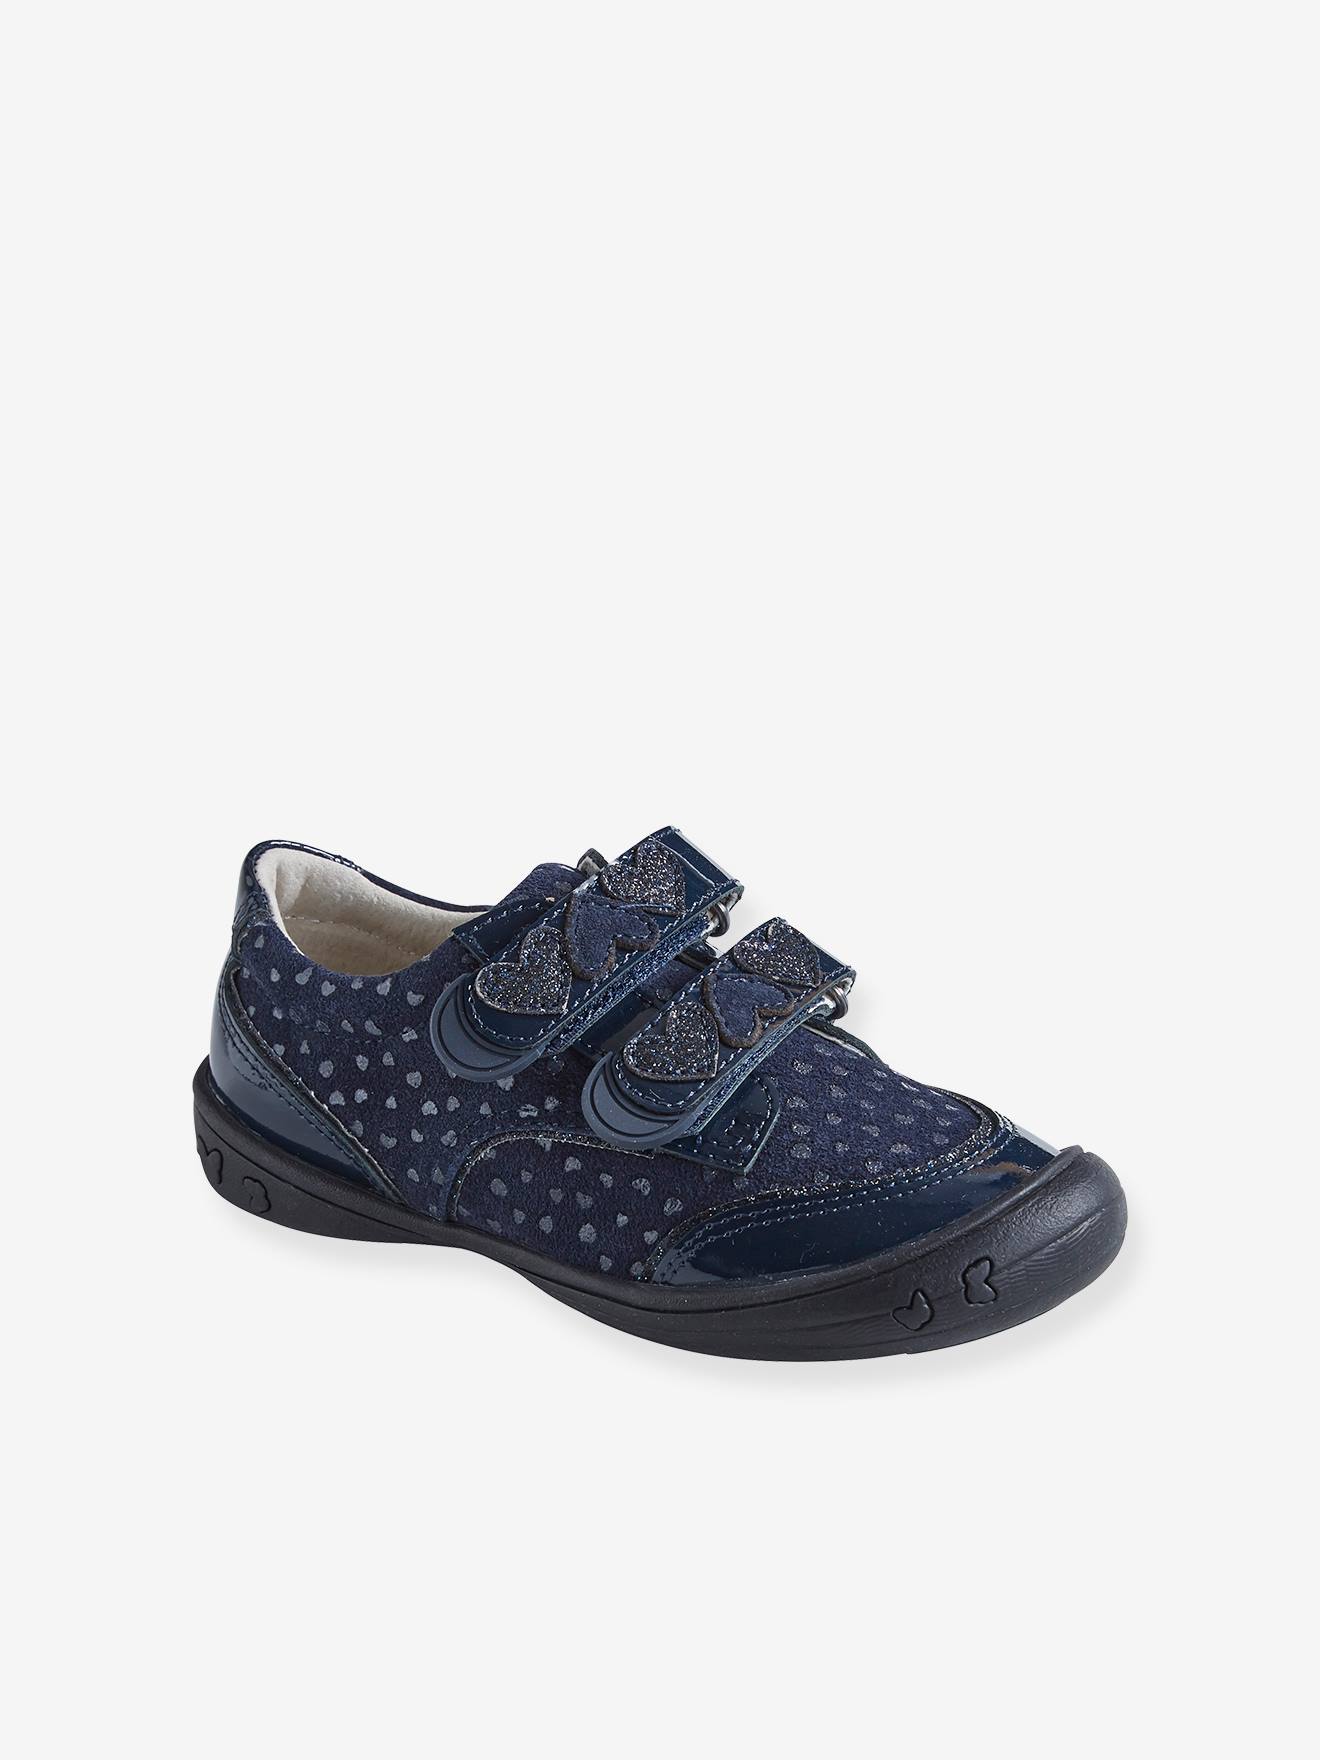 Derbies cuir fille collection maternelle marine